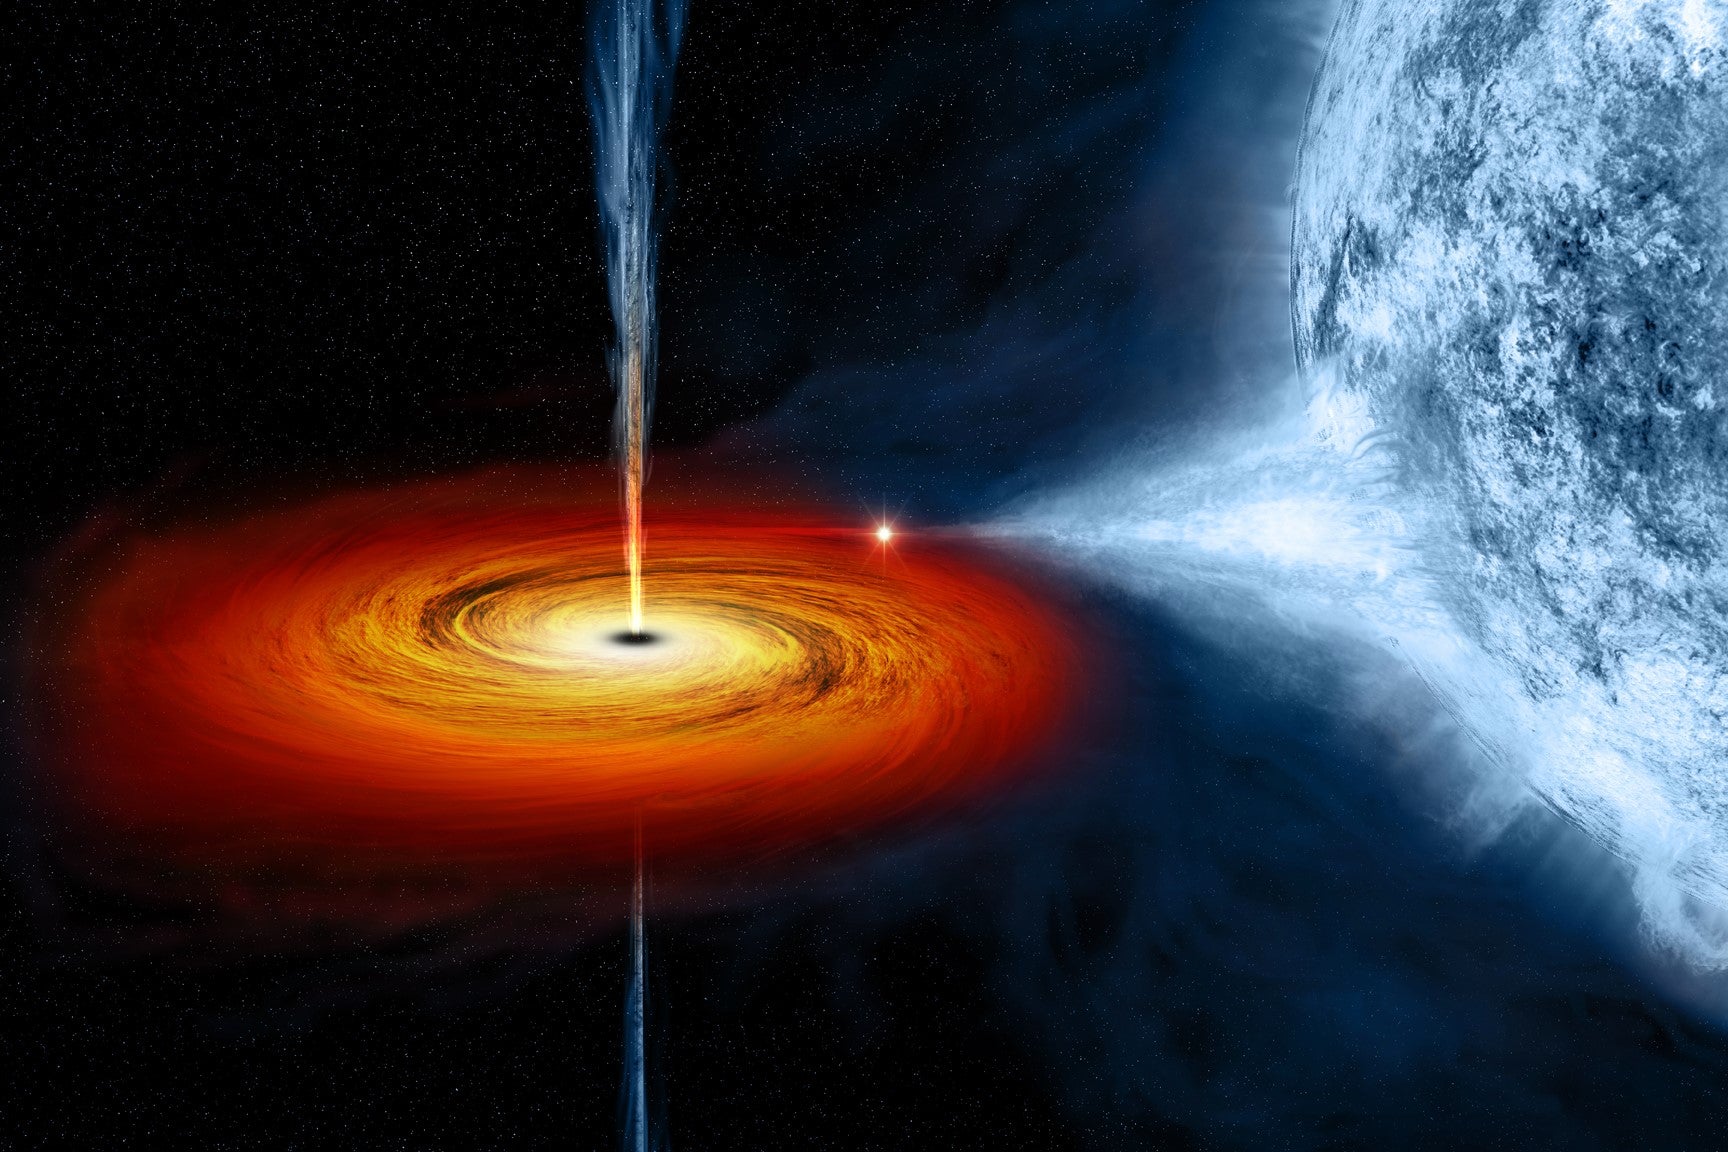 A black hole pulls material from a companion star towards it